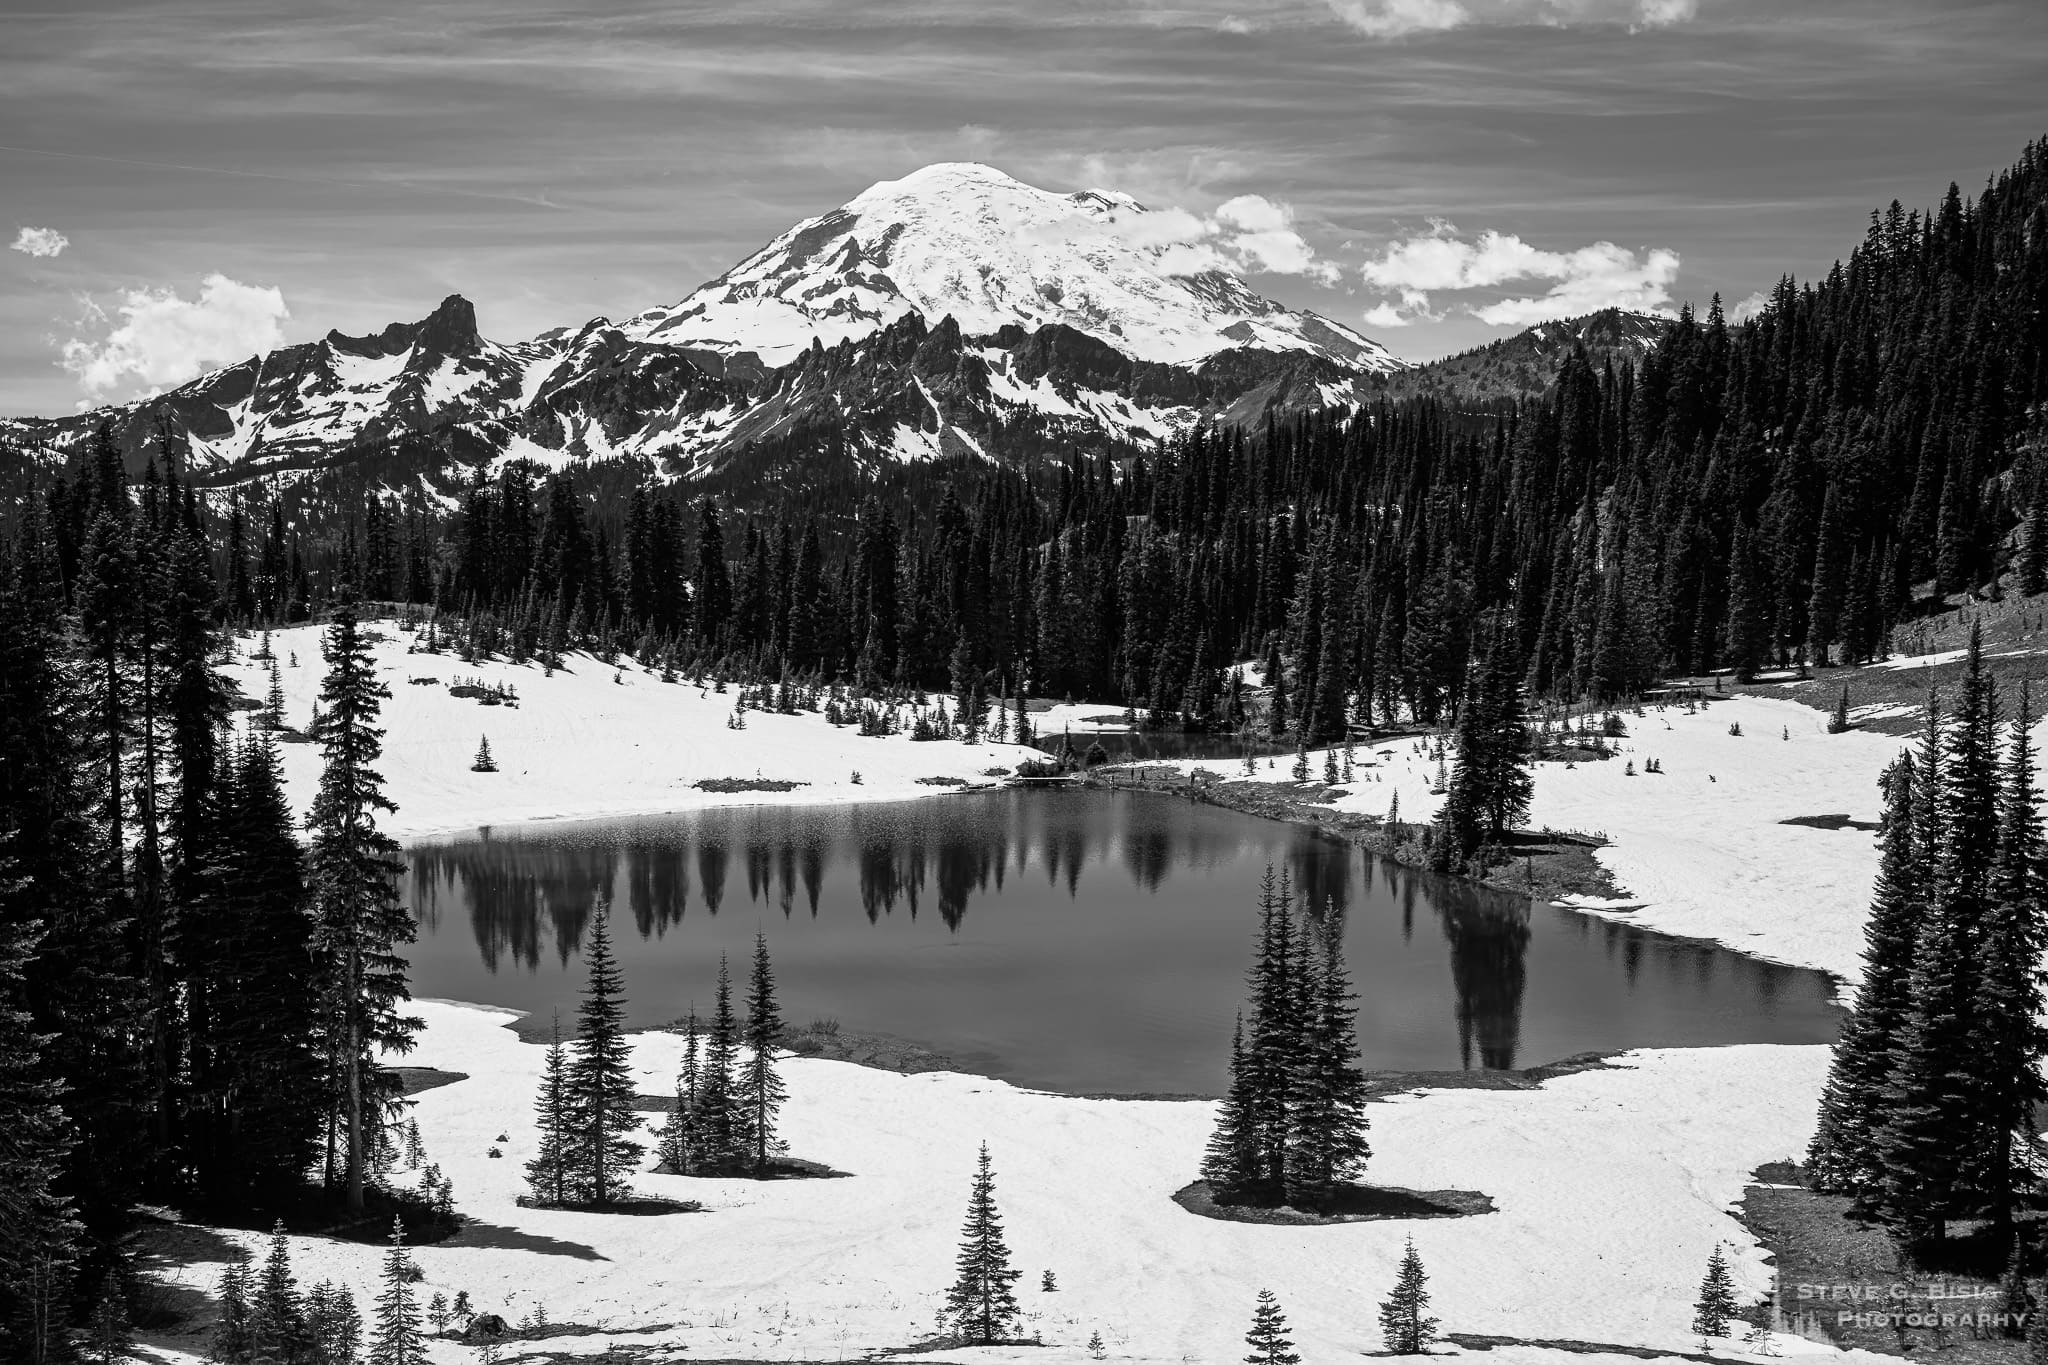 A landscape photograph of Mount Rainier as seen from a partially snow-covered Tipsoo Lake during late spring.